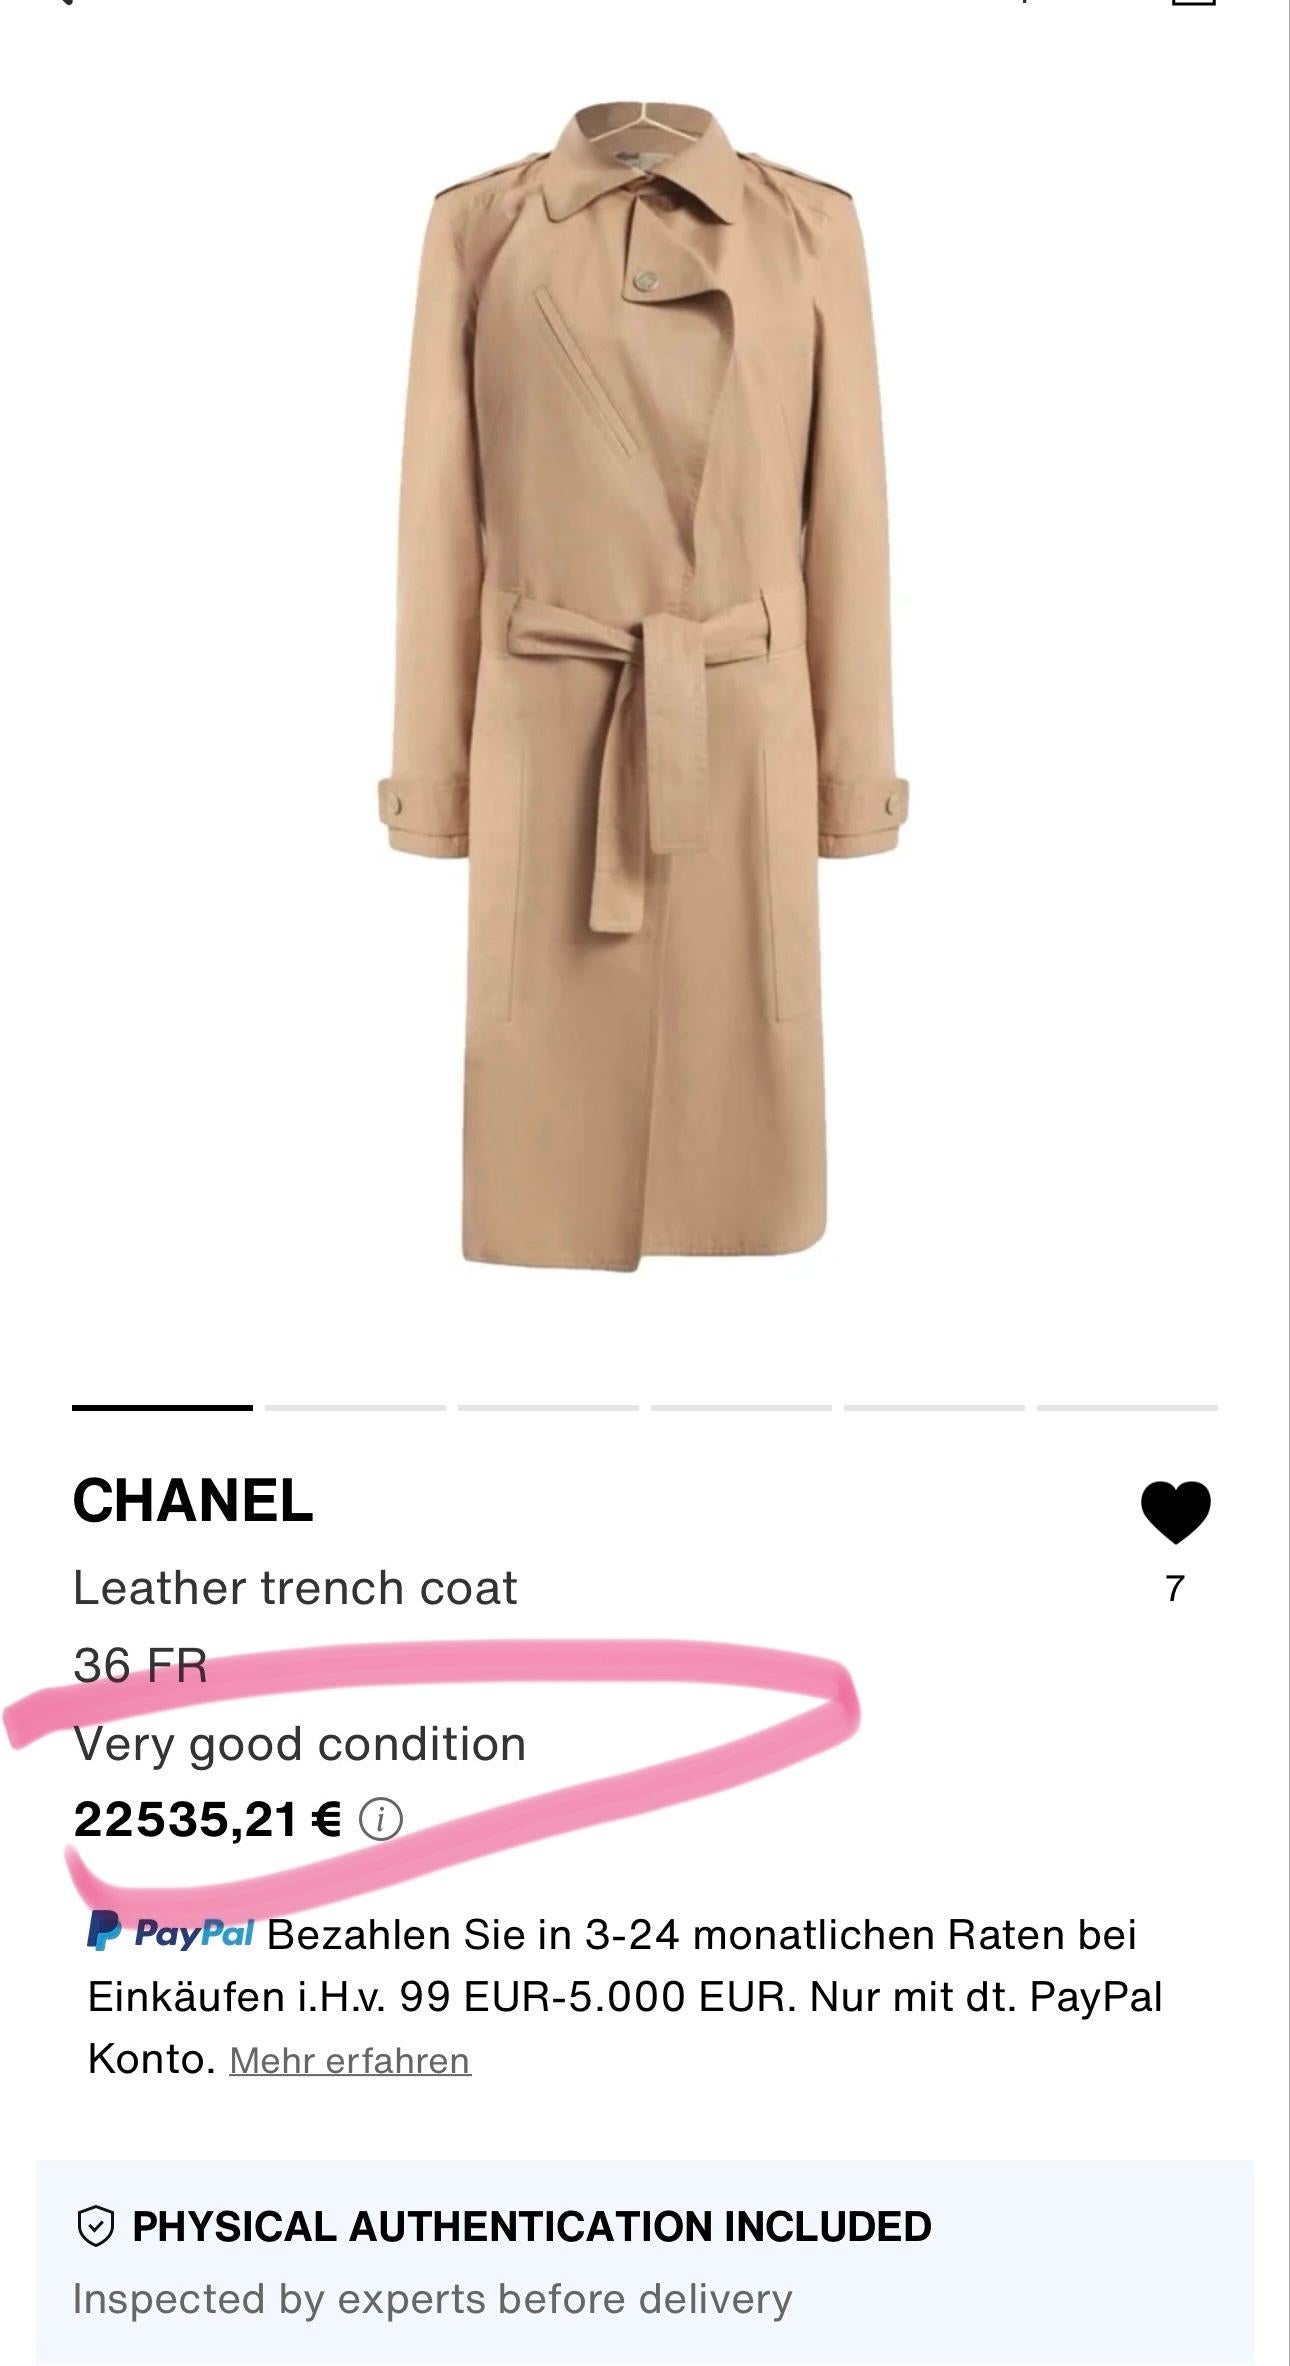 Luxurious Chanel nude beige leather maxi trench coat with marvellous CC logo silk brocade lining : boutique price 16,200$ (!)
- from Runway of Paris / DUBAI Cruise Collection
- CC logo gold-tone buttons
Size mark 38 FR. Kept unworn, condition is